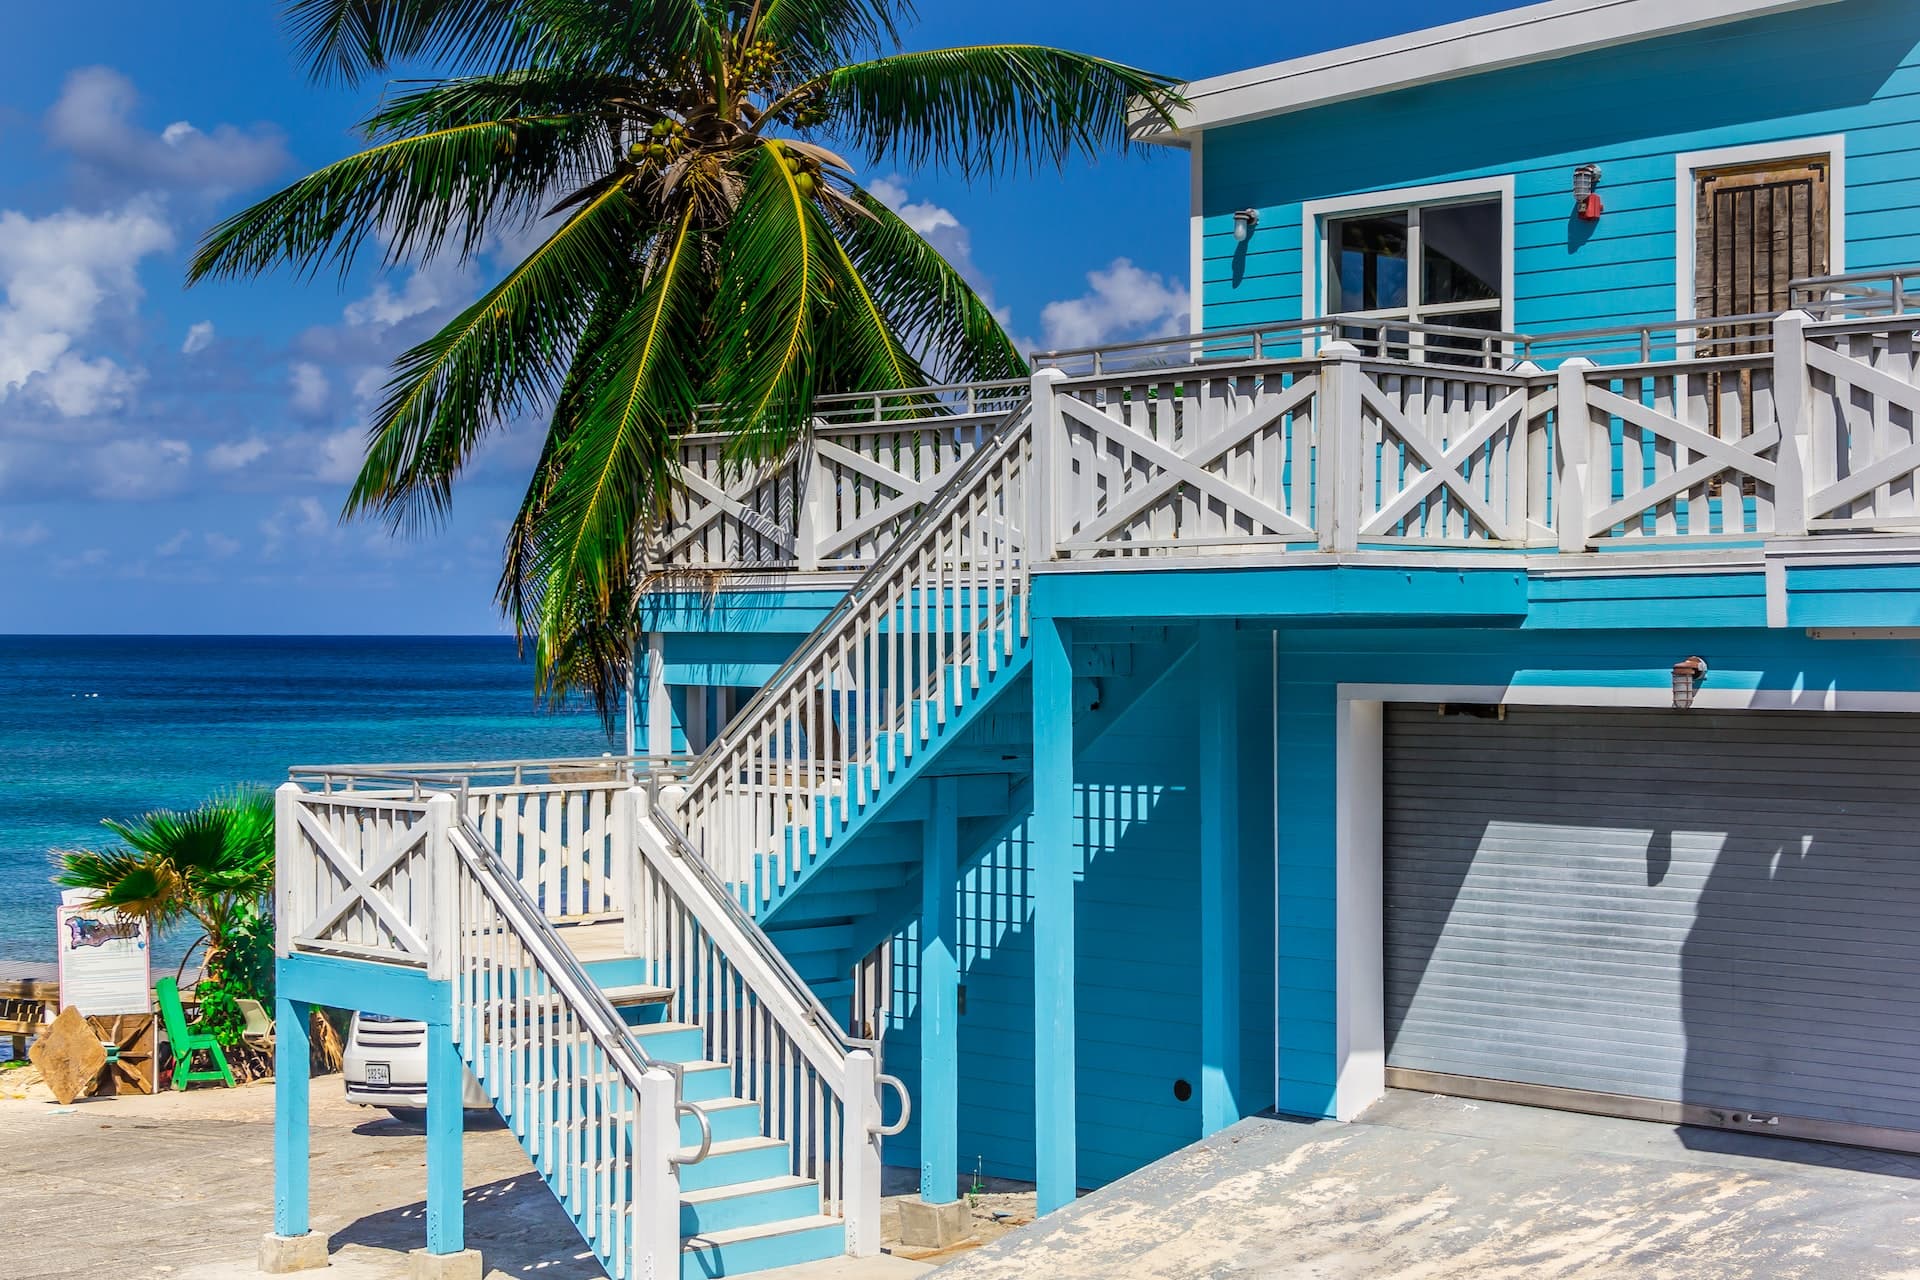 Caribbean beach house for shared vacation home ownership